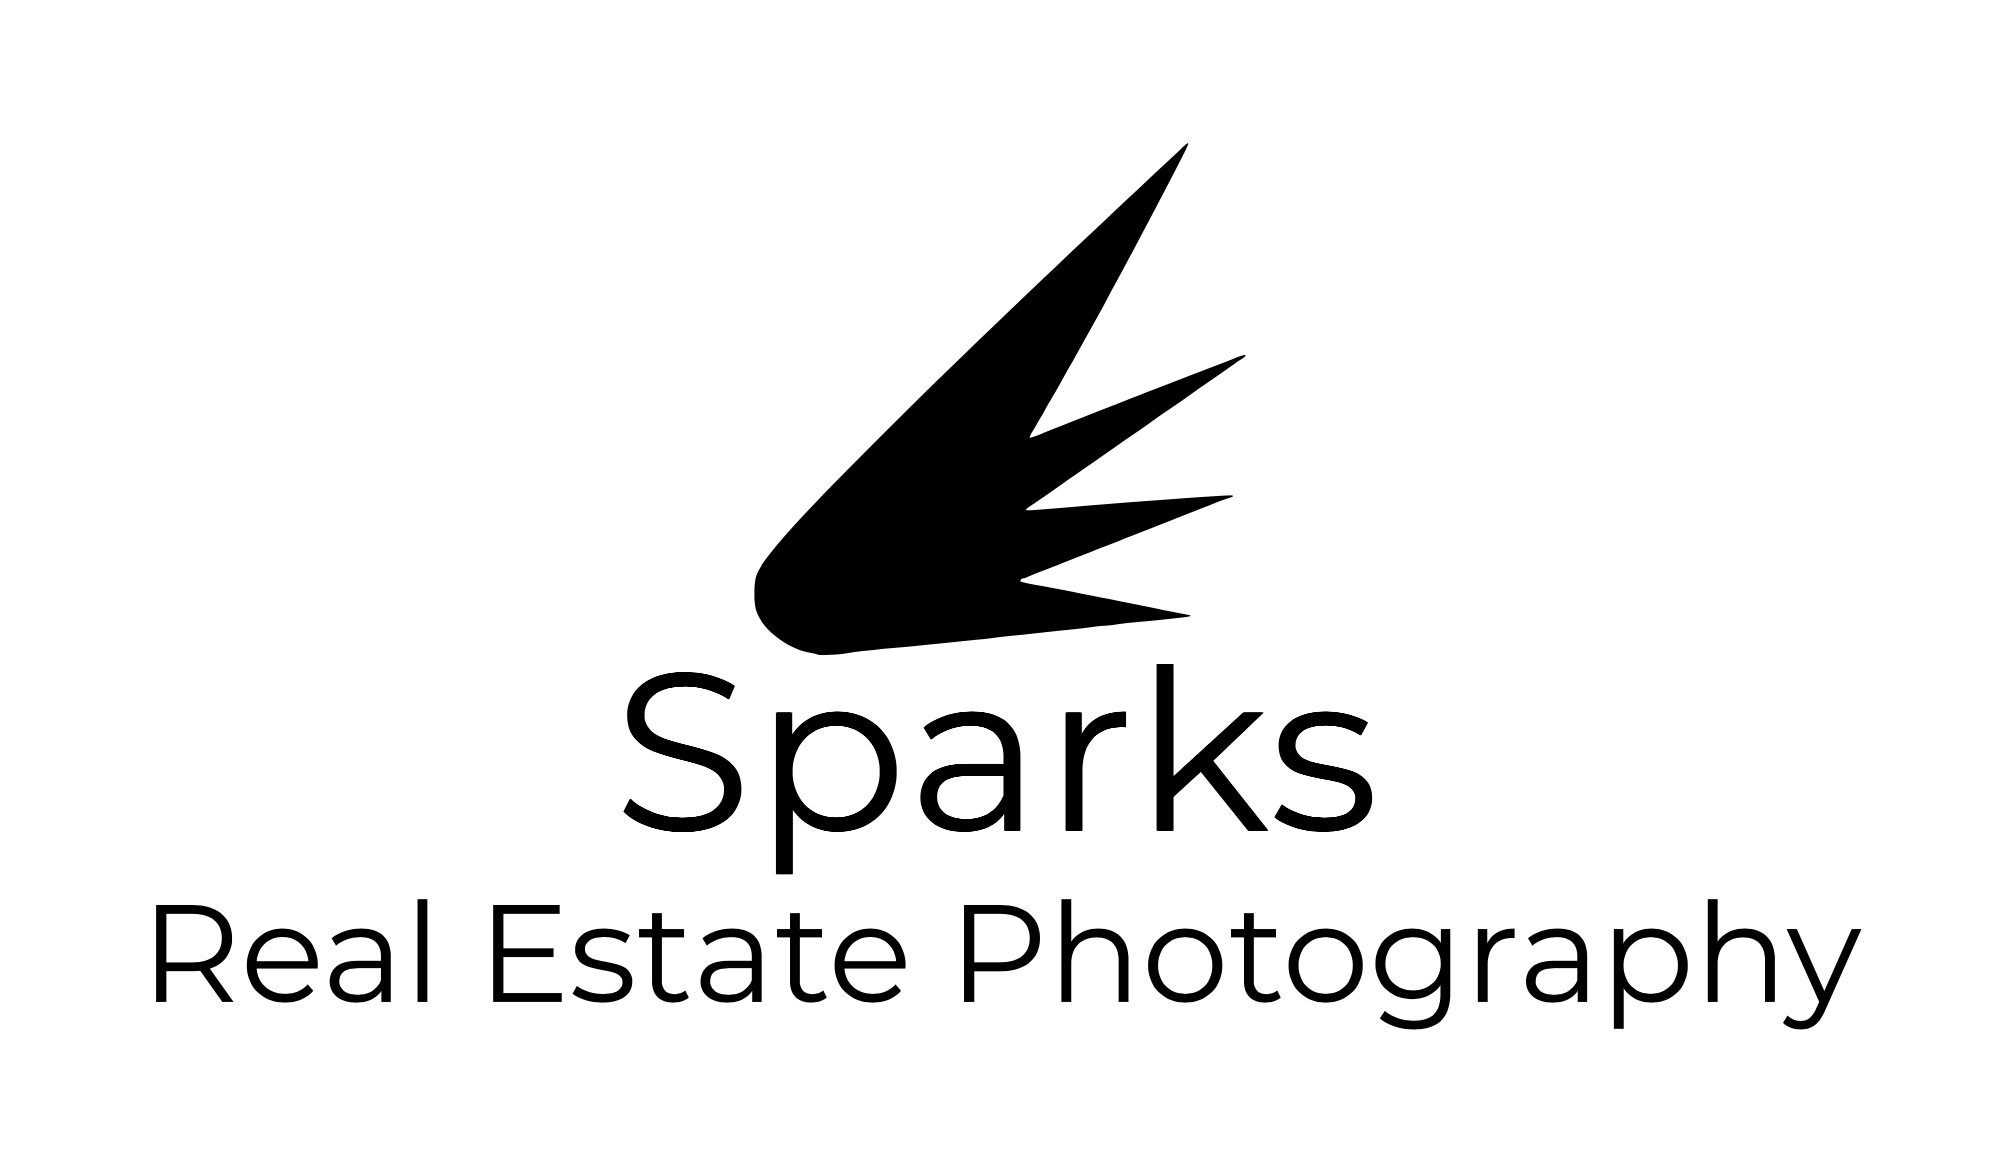 Sparks Real Estate Photography